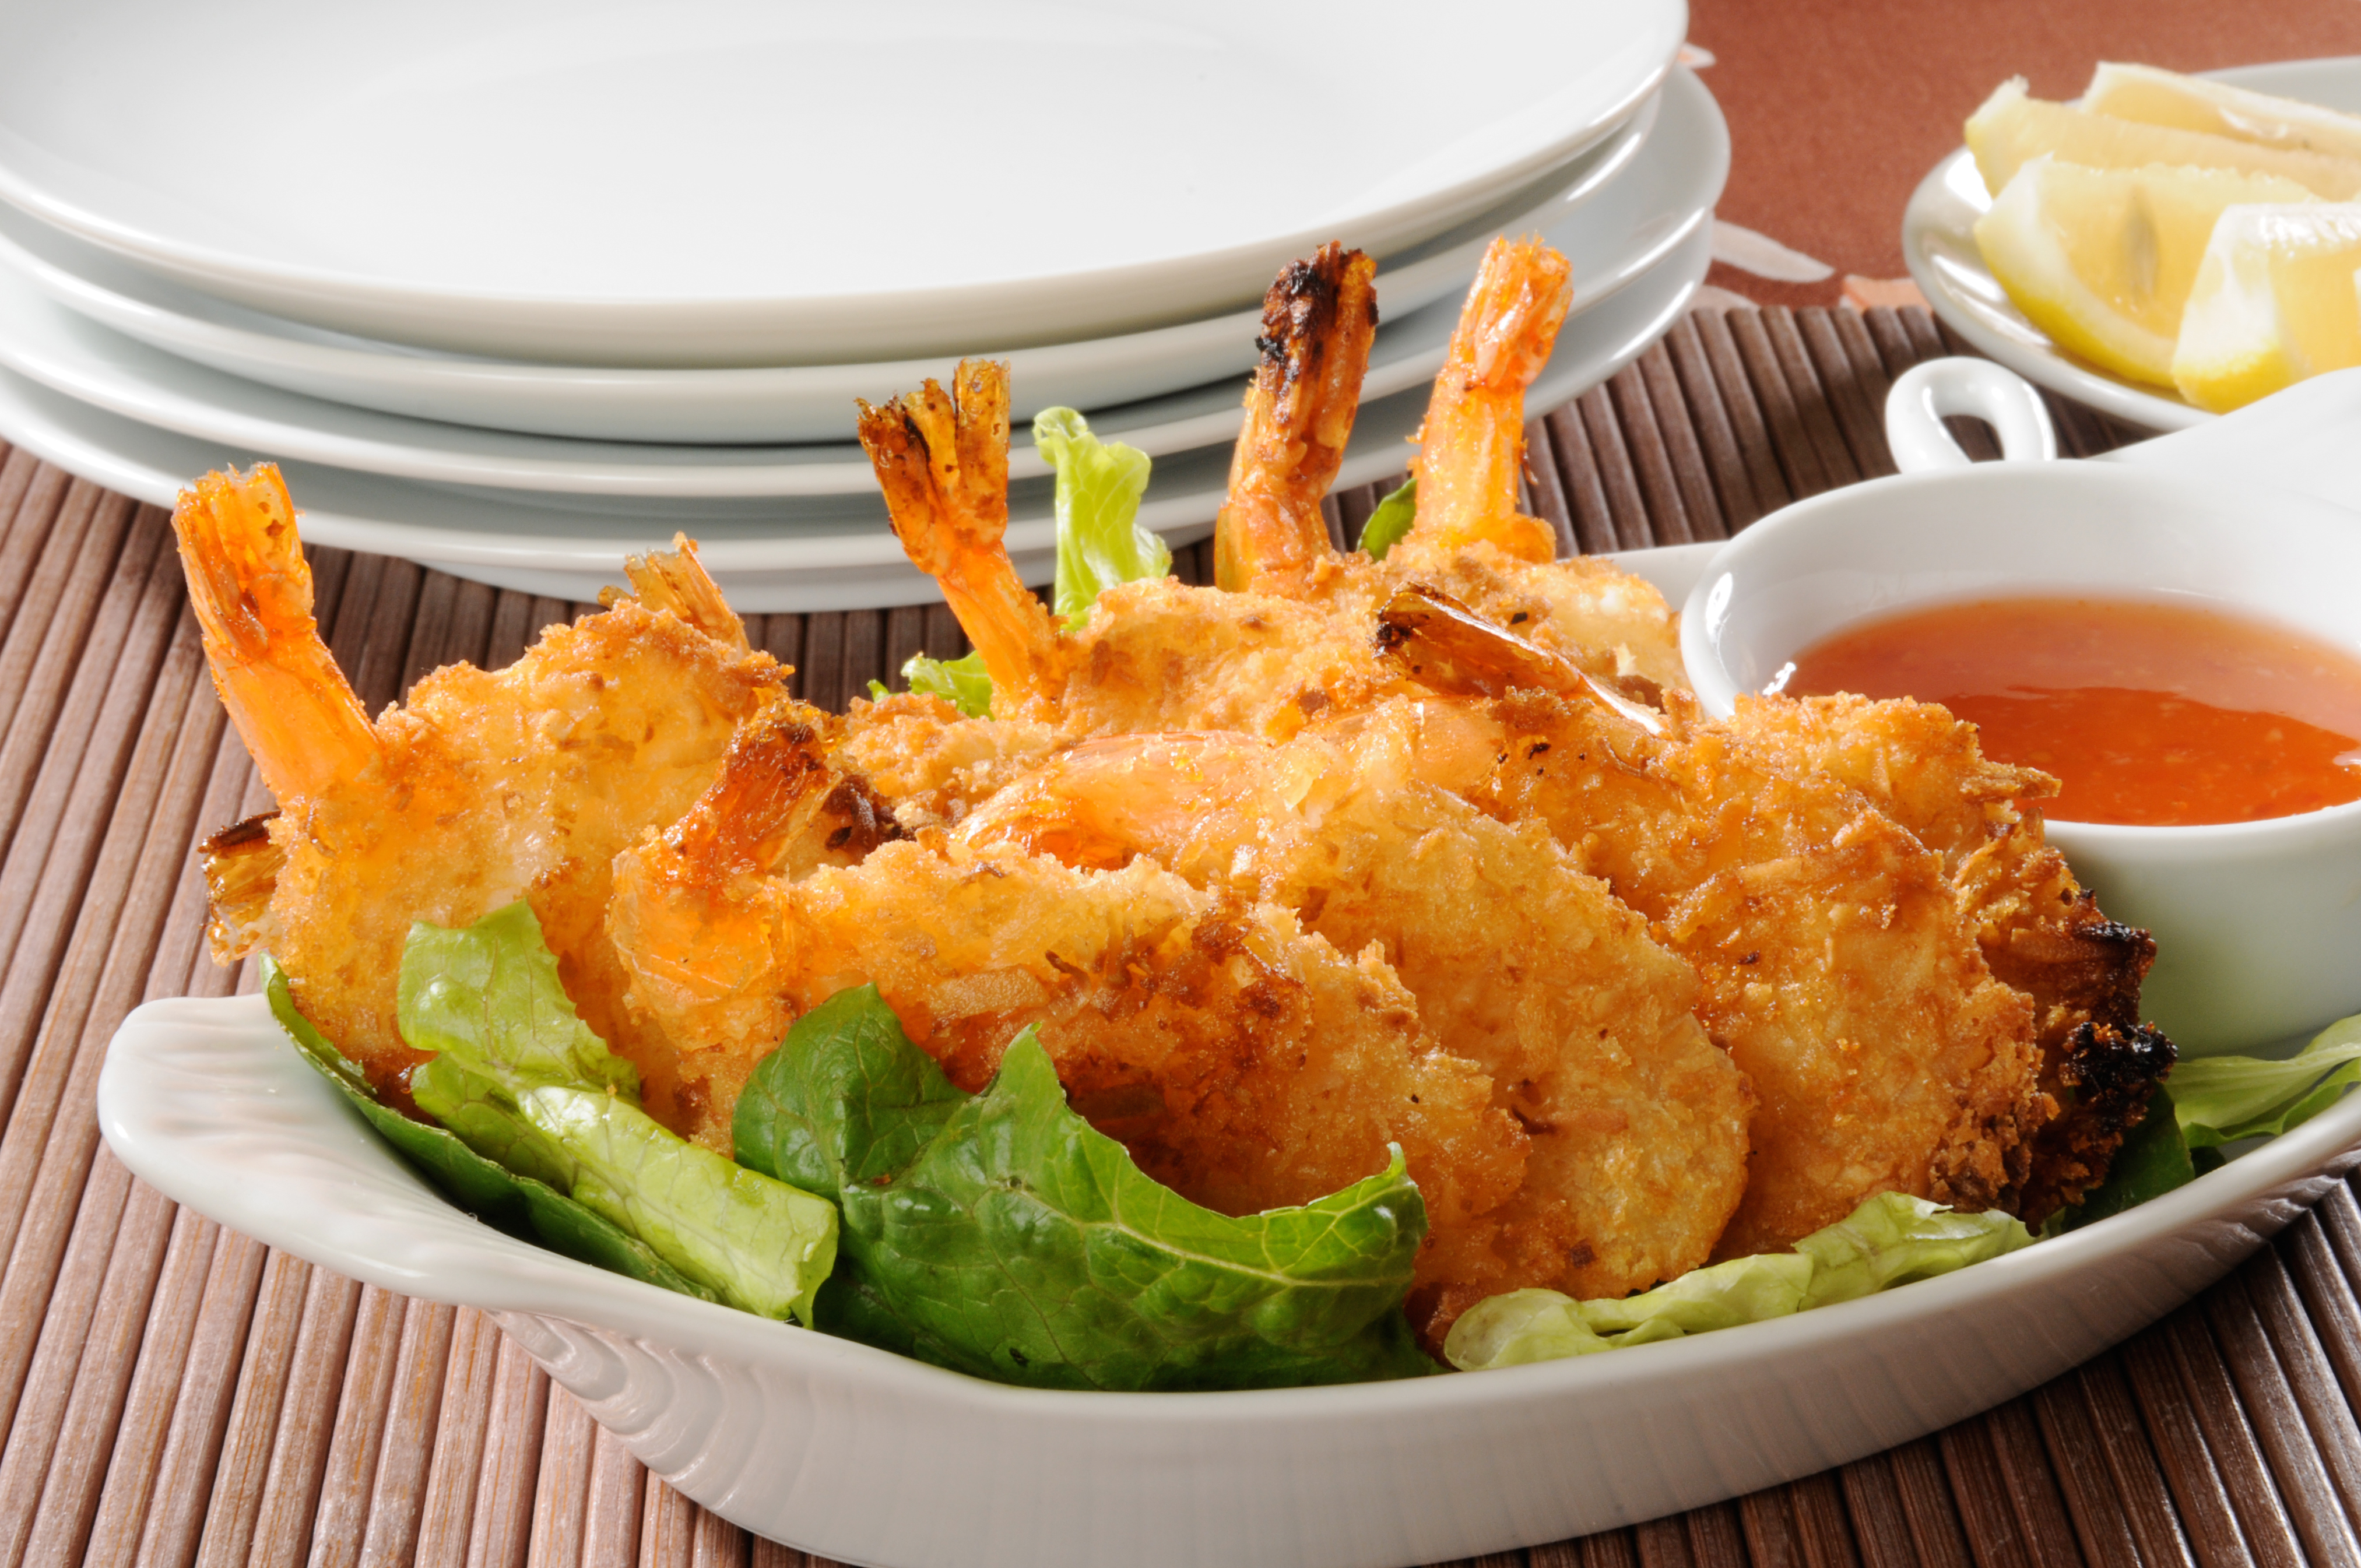 In just 15 minutes, Air Fried Coconut Shrimp!